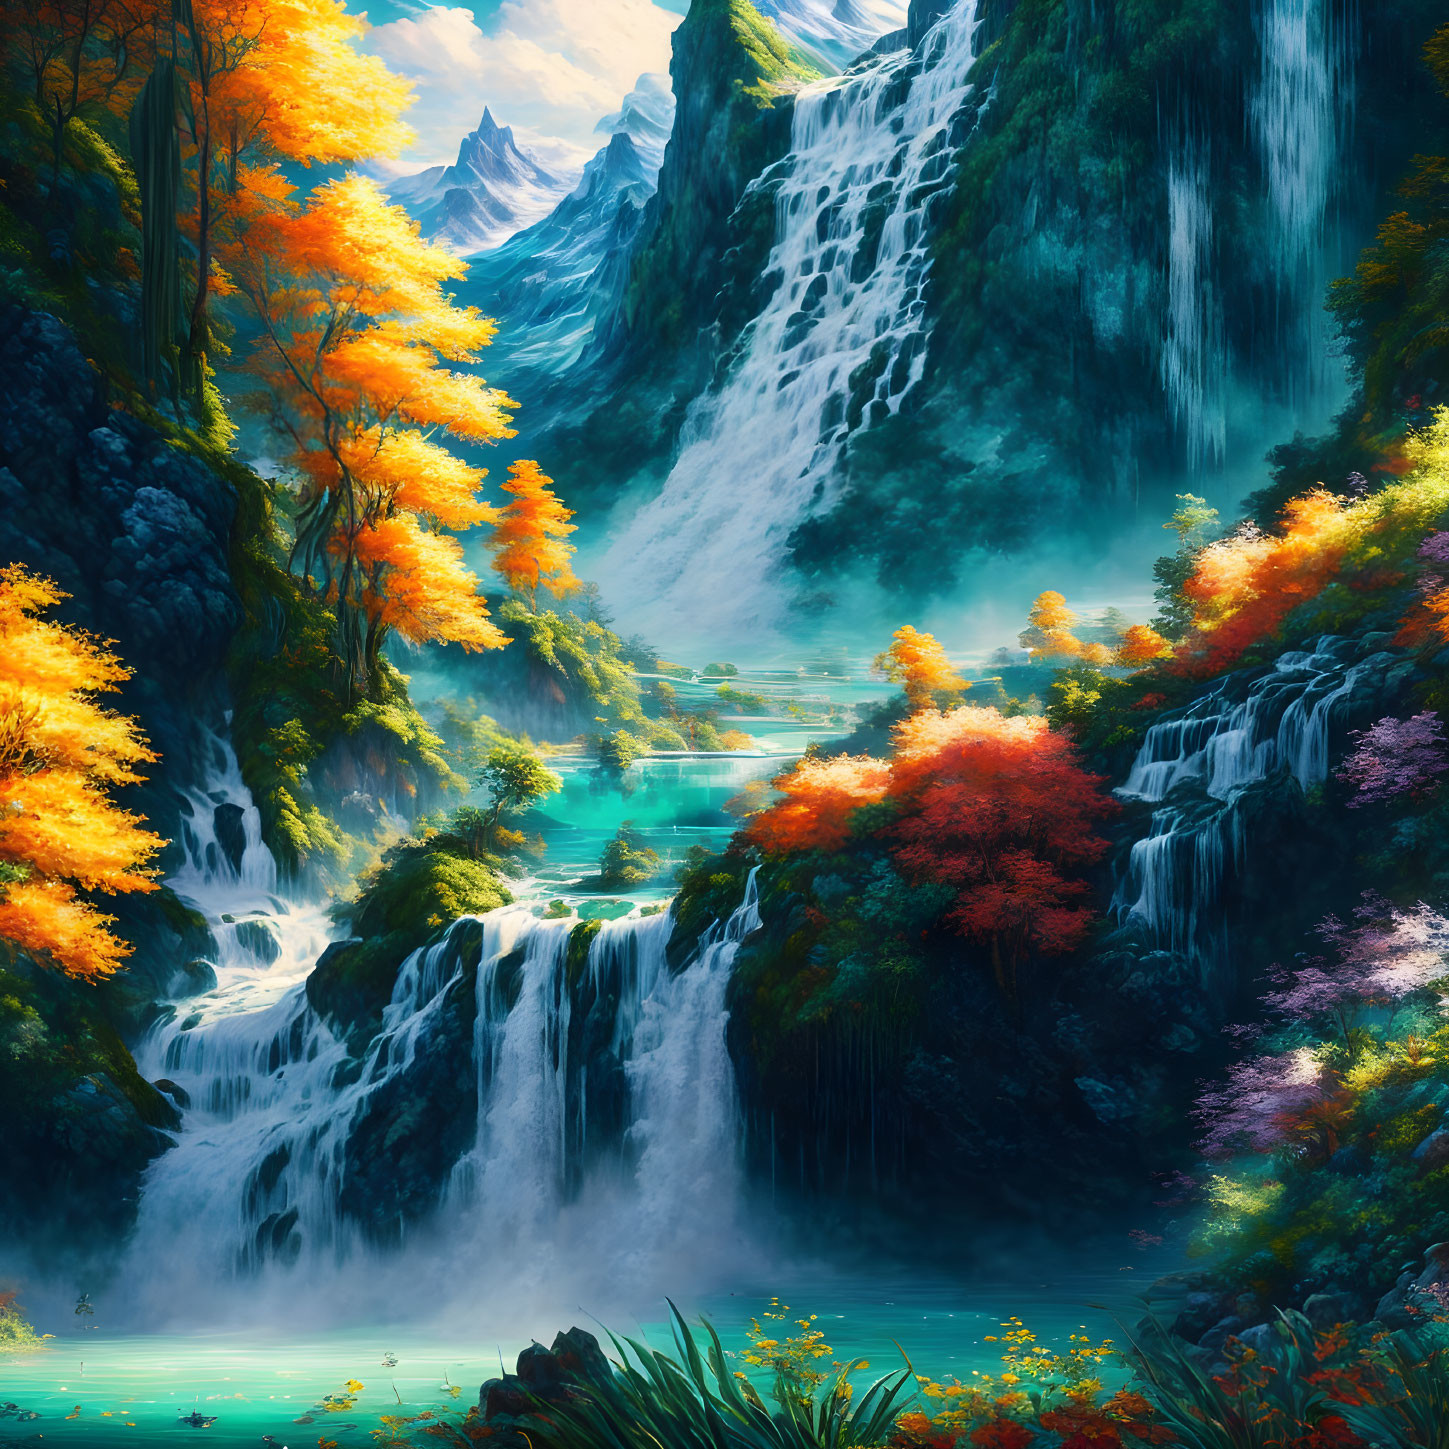 Fantasy landscape with cascading waterfalls, river, autumn trees, and mountains